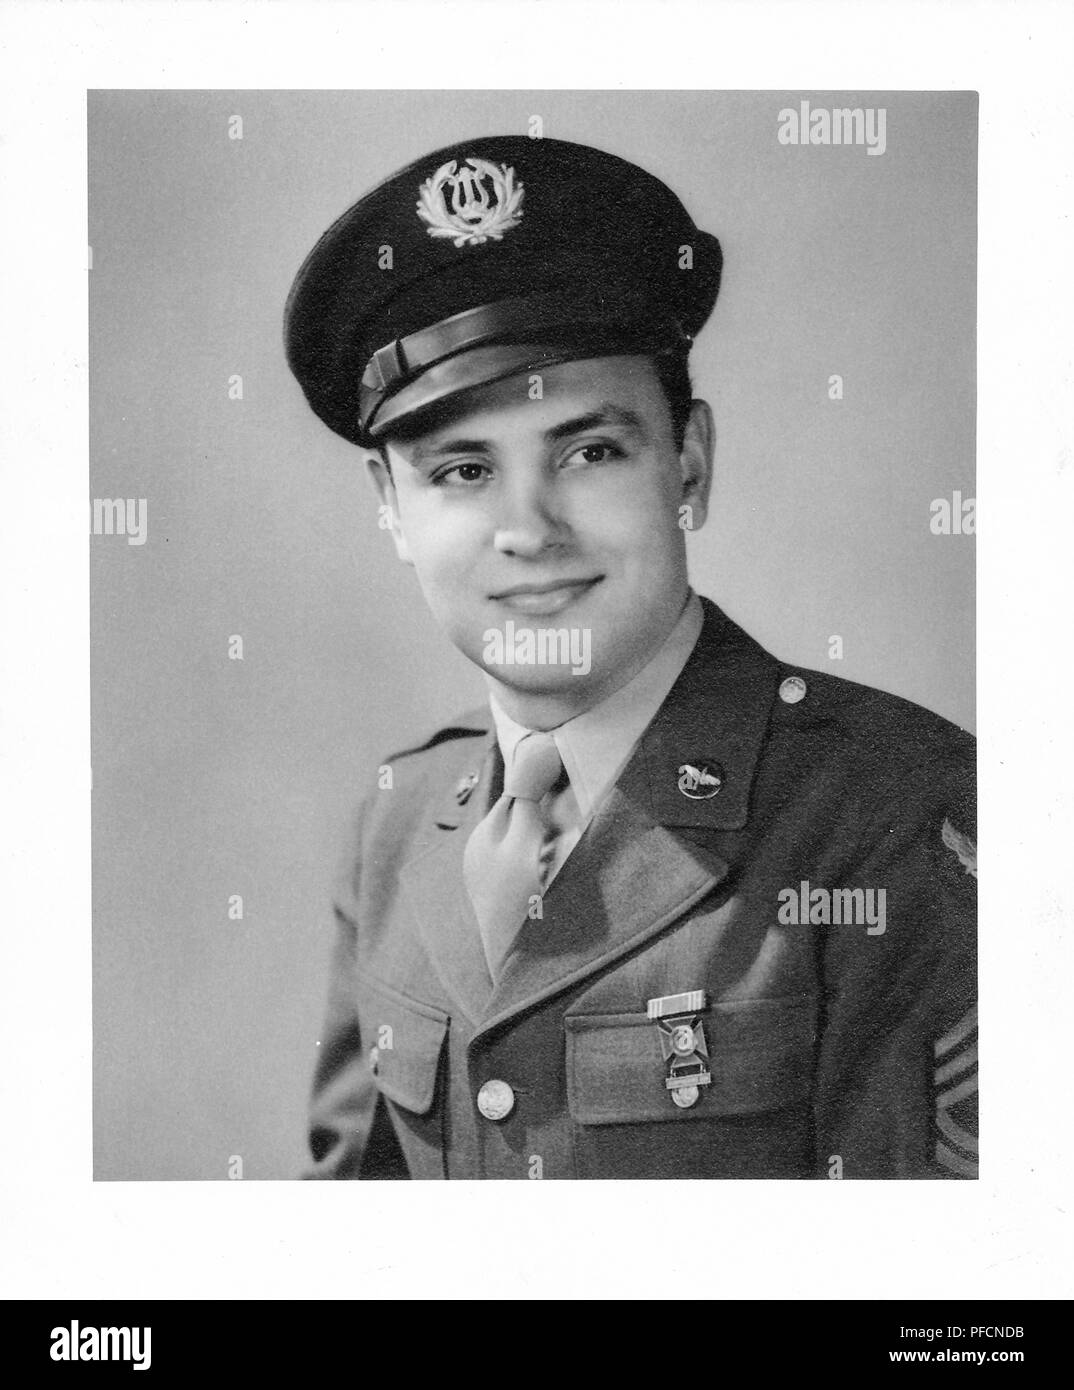 Black and white photograph, showing a formal headshot of a male soldier, looking off camera, with a very slight smile on his face, wearing a uniform with an airforce pin on the lapel, a medal, and a cap with a US Army Band insignia, likely photographed in Ohio during World War II, 1945. () Stock Photo